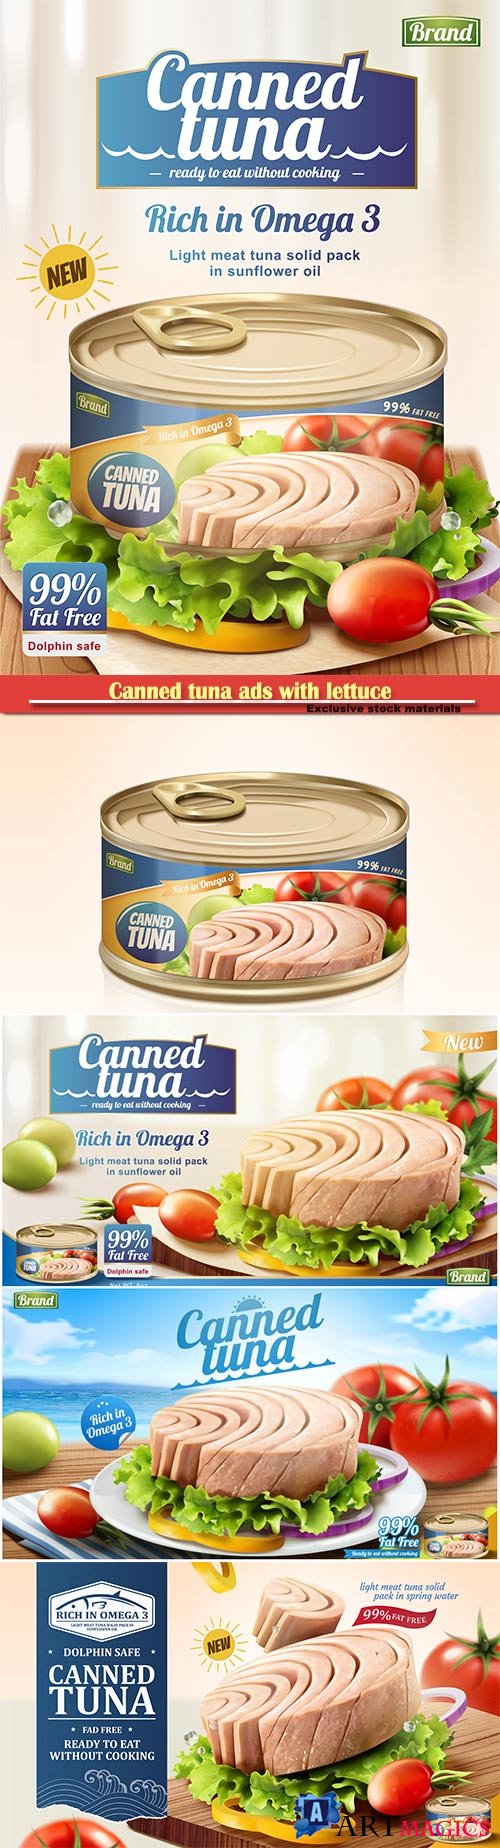 Canned tuna ads with lettuce and tomato in 3d illustration